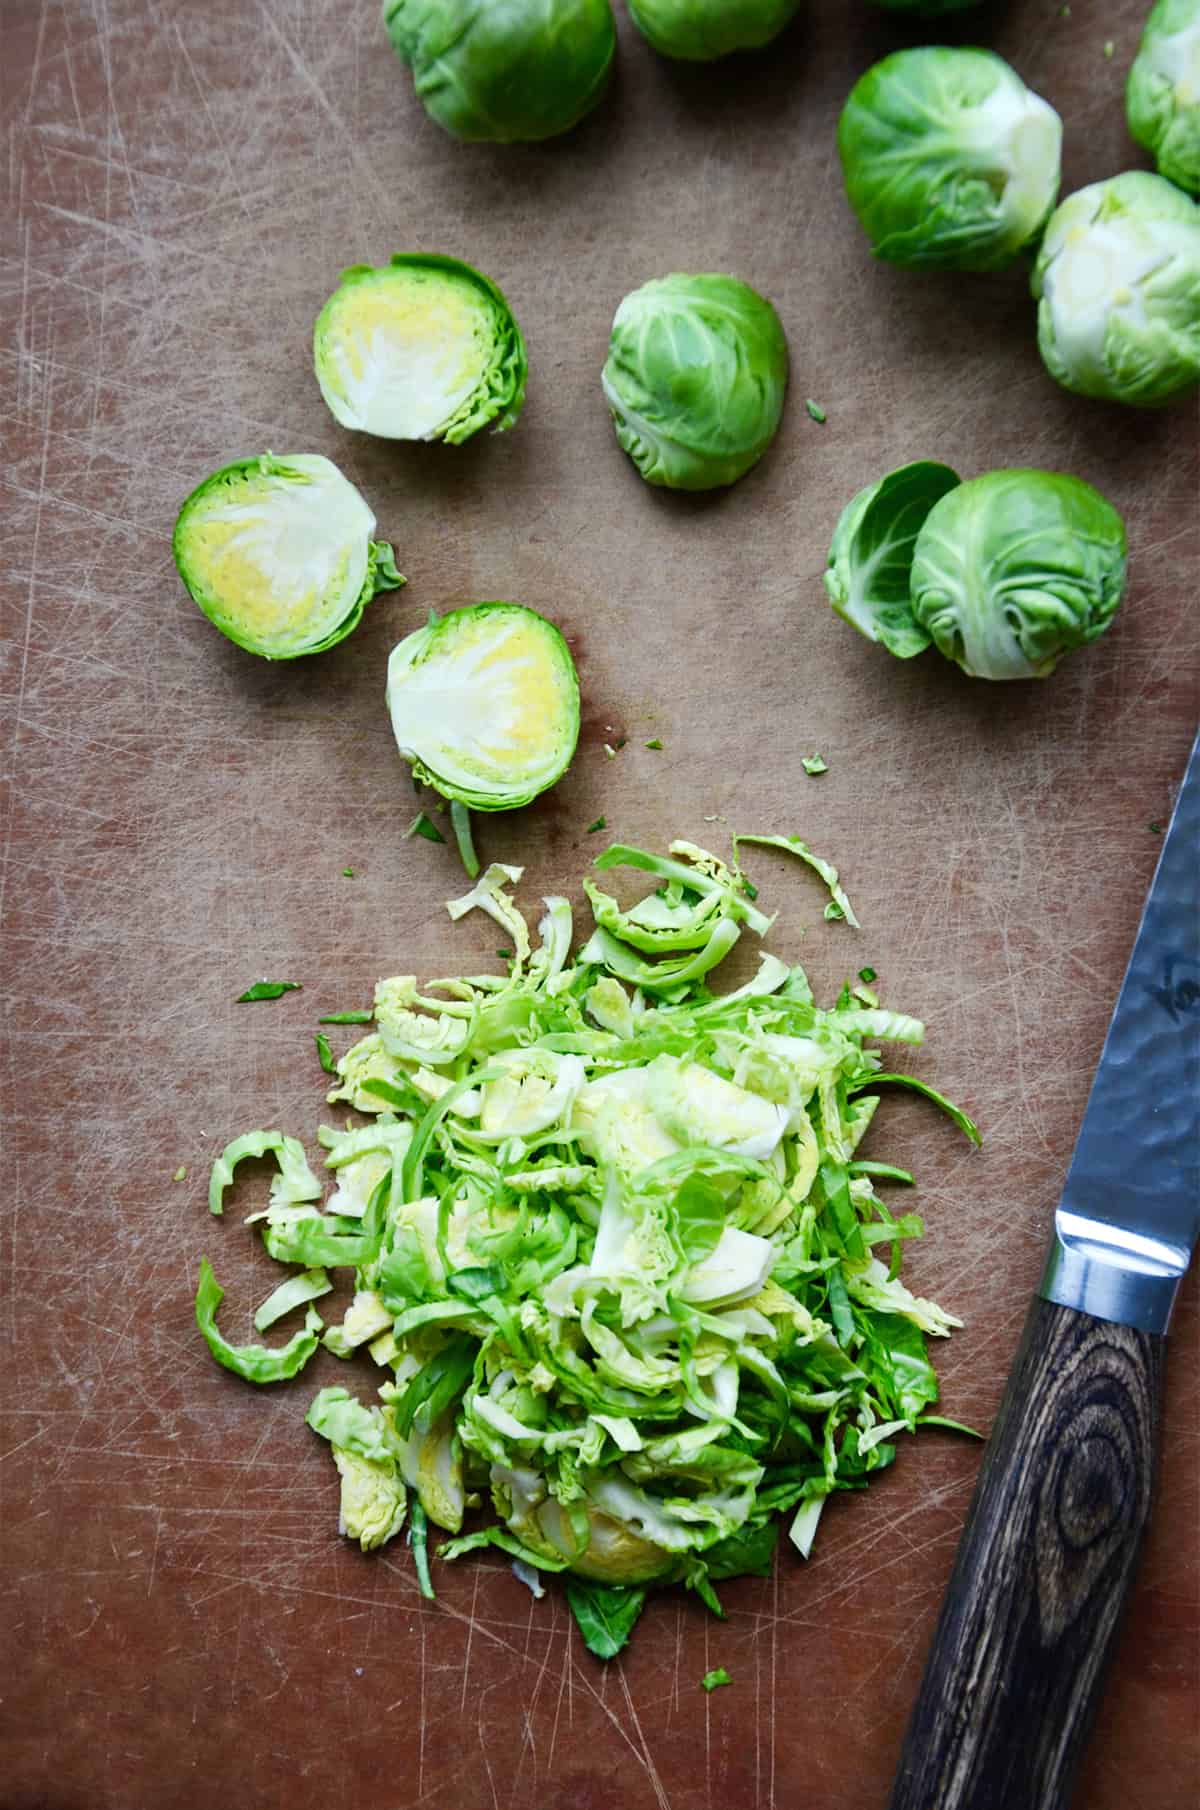 Shredded and halved Brussels sprouts on a cutting board. A paring knife is to the side of the Brussels sprouts.